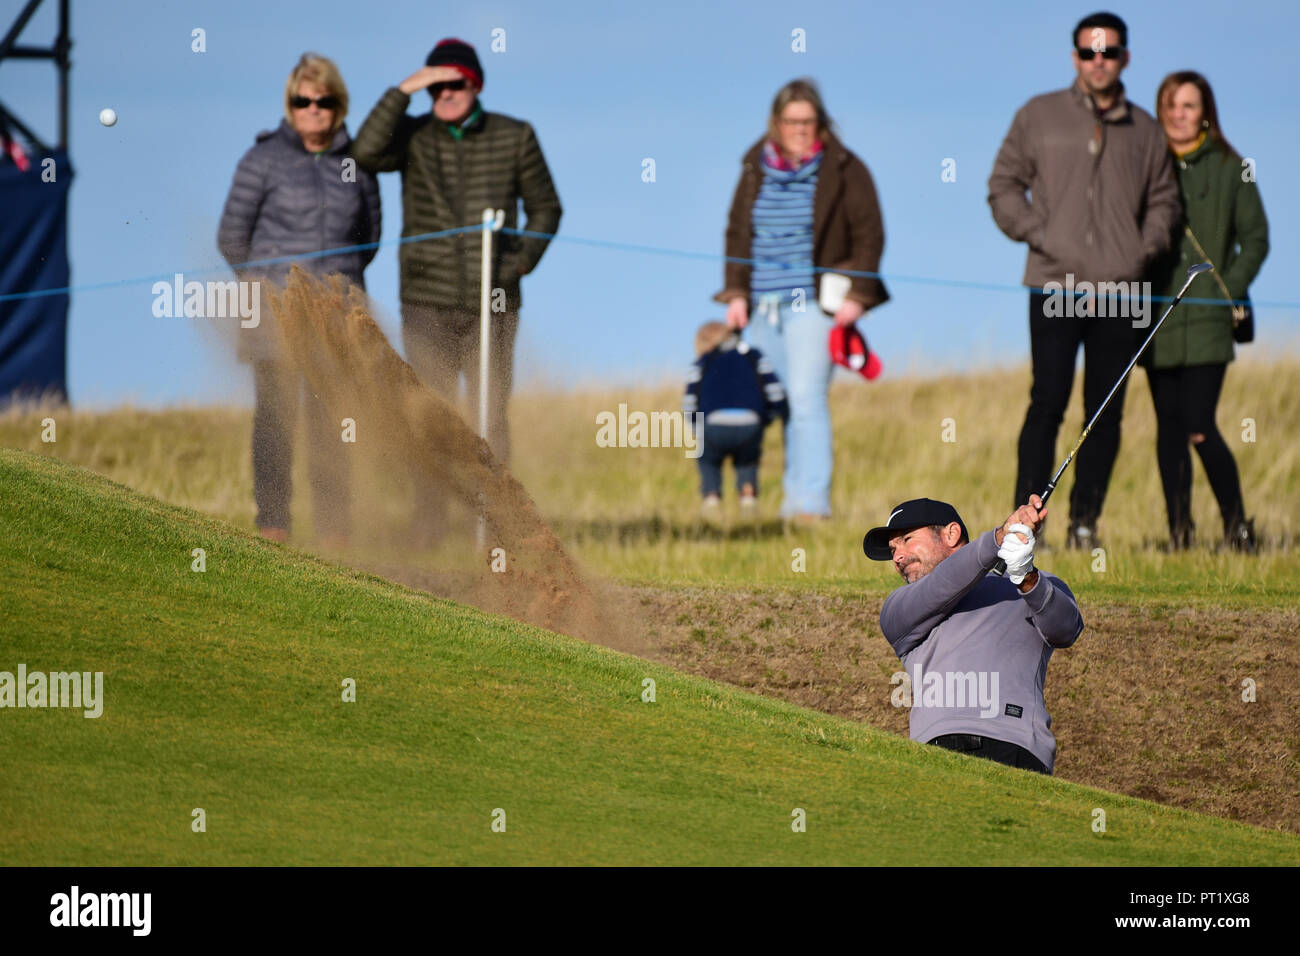 Kingsbarns, Scotland, United Kingdom, 05, October, 2018. Trevor Immelman of South Africa blasts a ball out of a bunker at Kingsbarns Golf Links during the Dunhill Links Championship. © Ken Jack / Alamy Live News Stock Photo